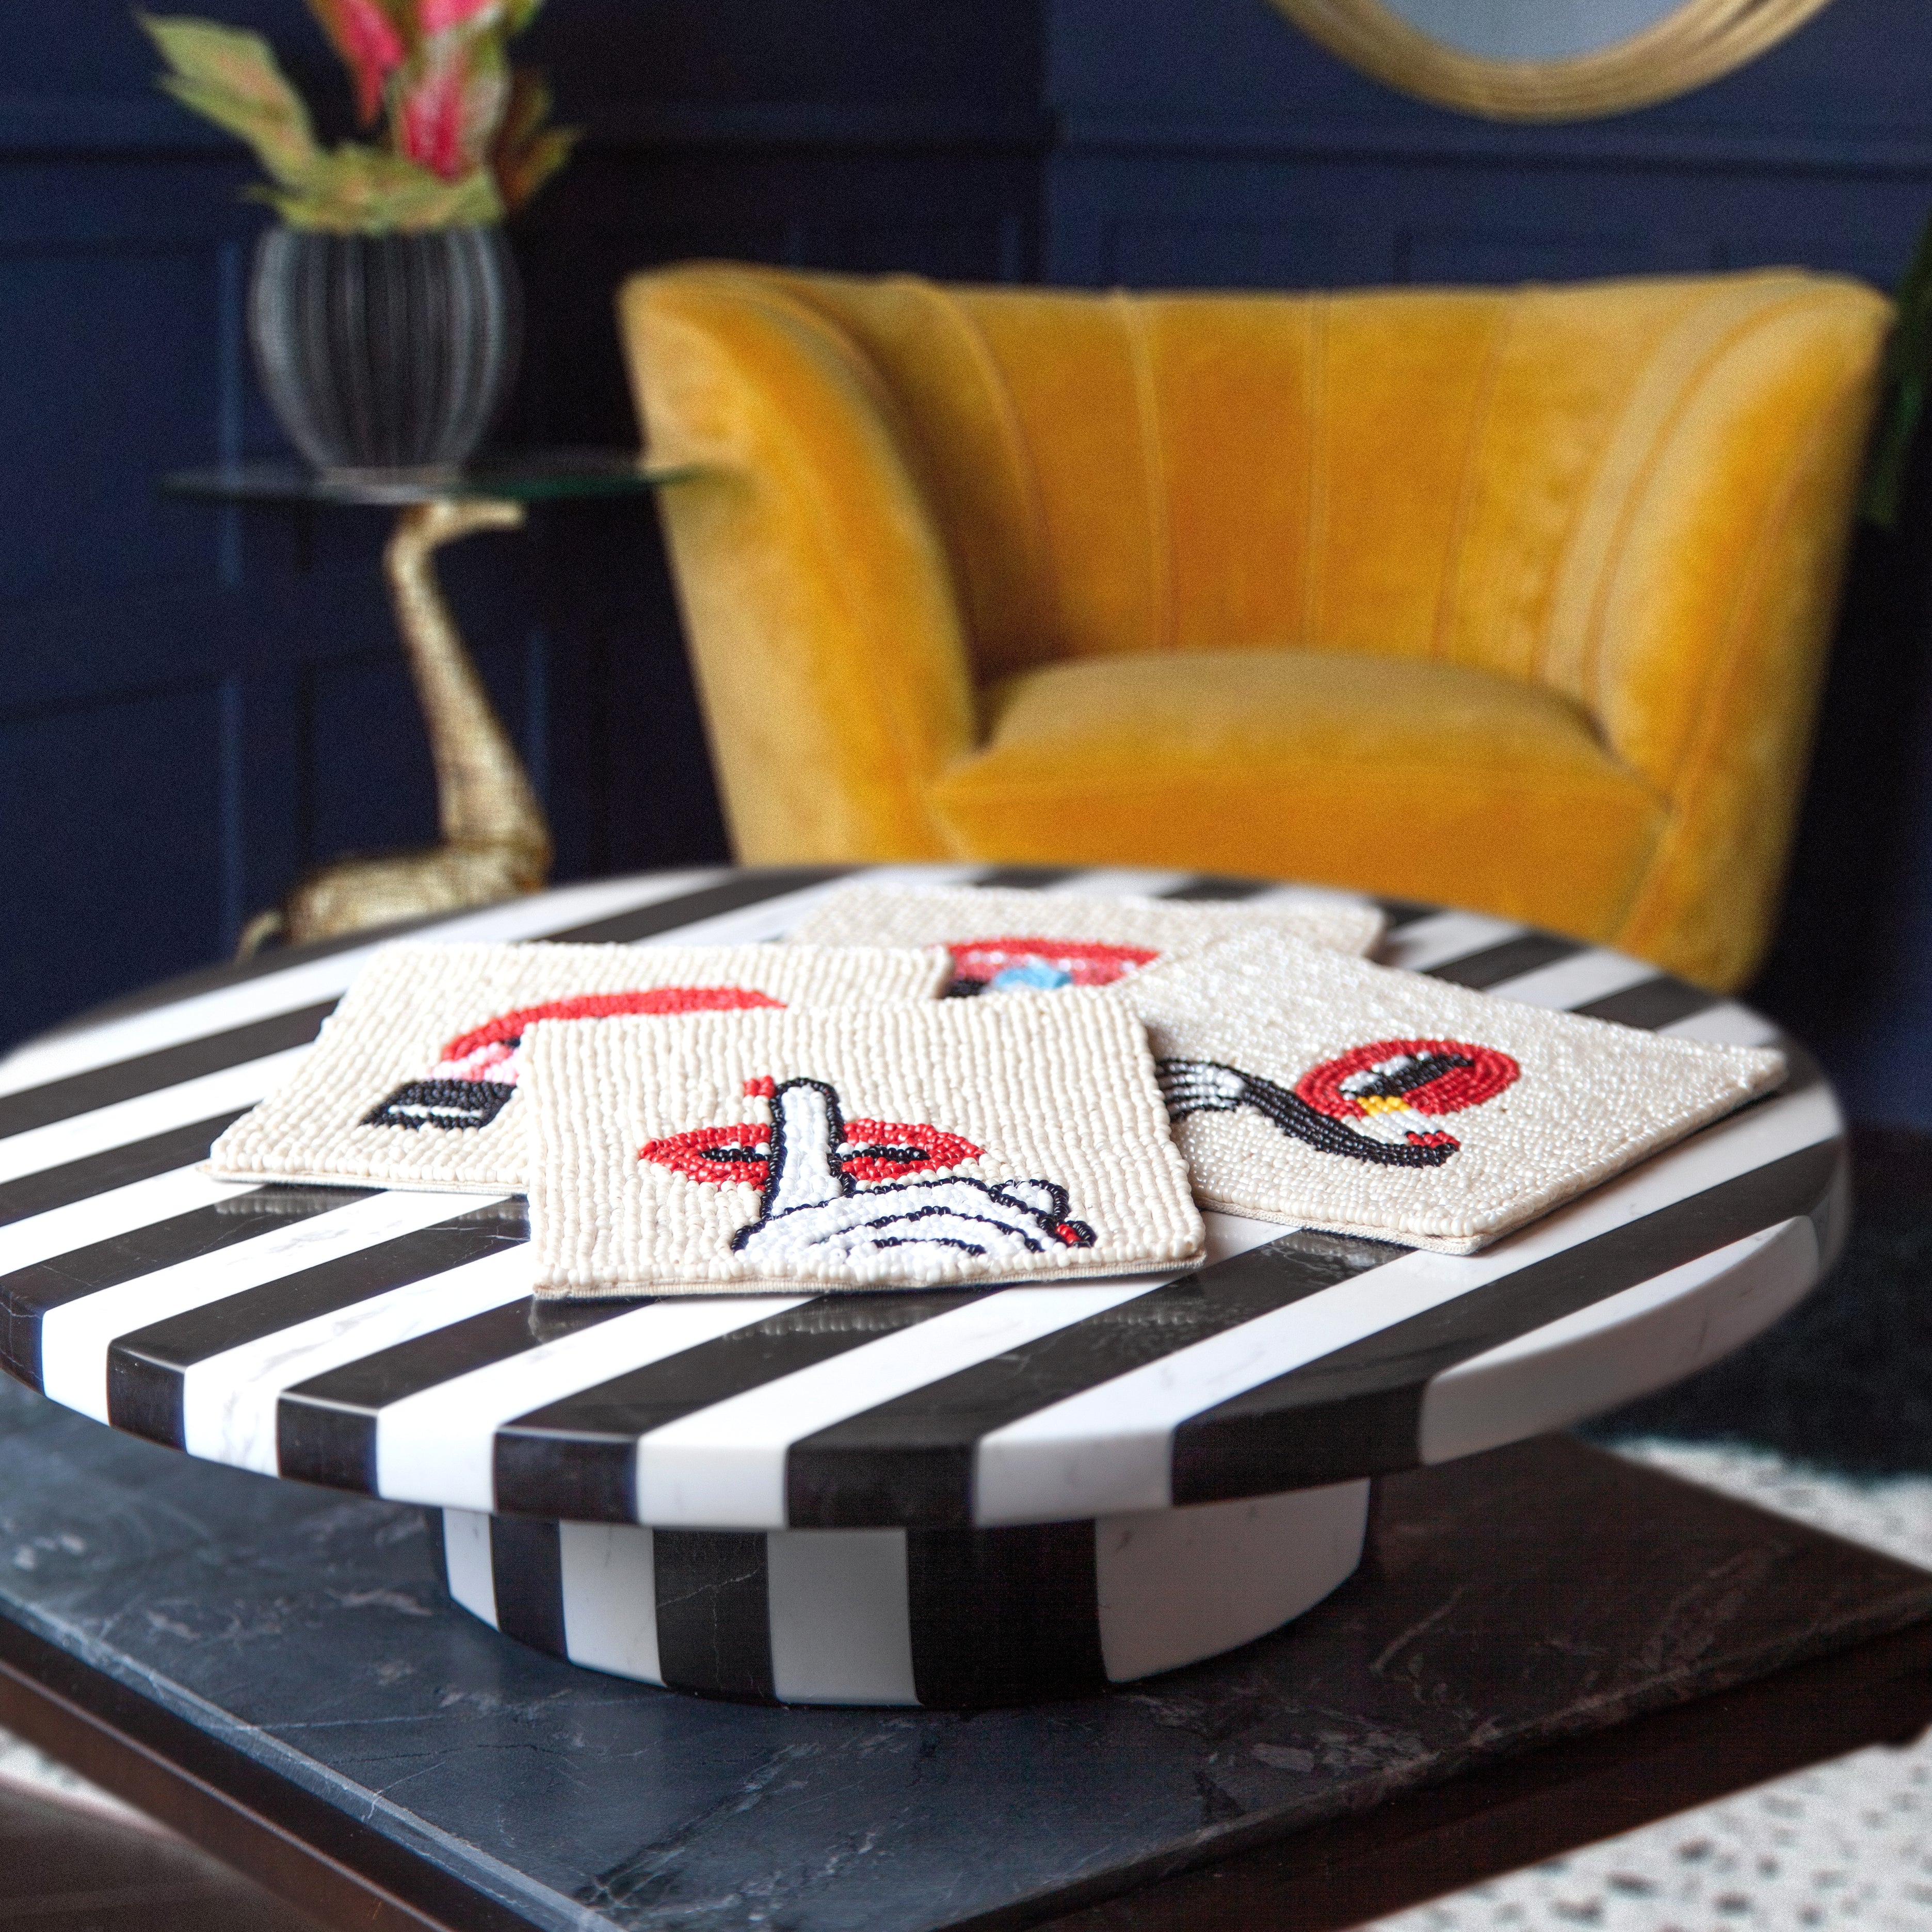 Large Marble Monochrome Cake Stand